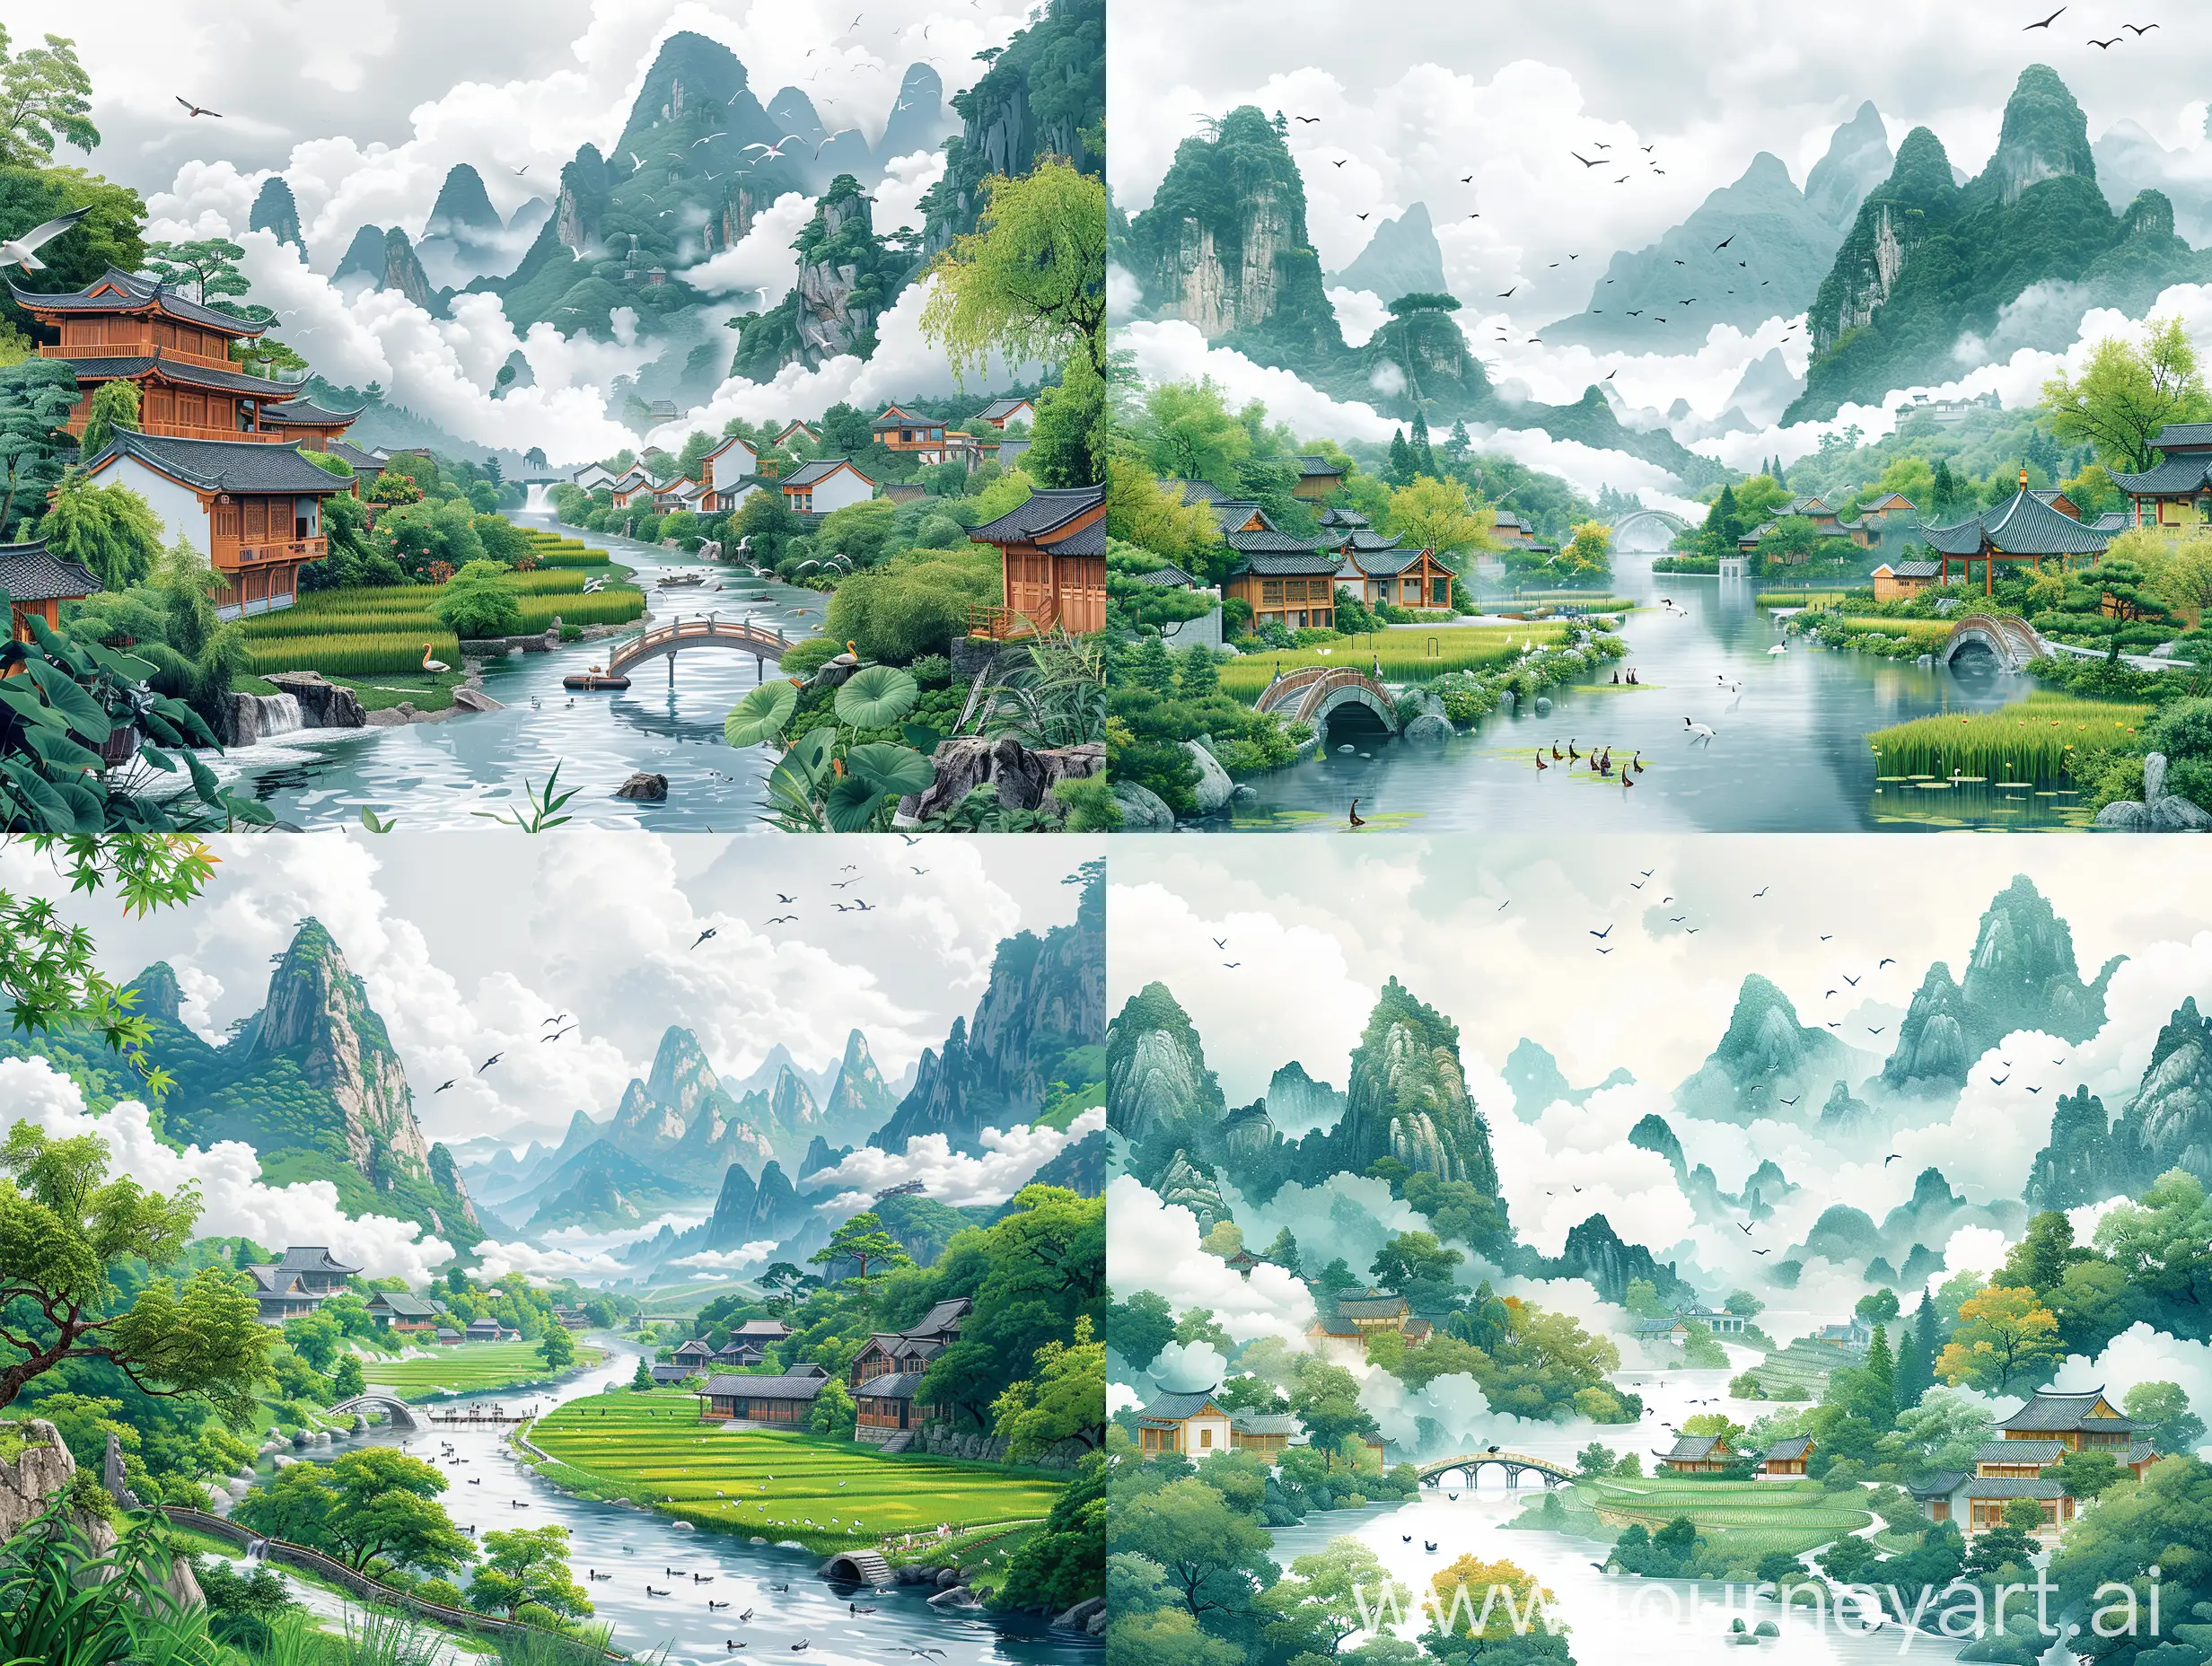 Chinese style illustration, flat painting, whiteclouds and green mountains, distant villages, riverflowing through. The scene includes mature ricefields, small bridges and flowing water, ducks.traditional Chinese wooden house buildings, andriver gulls flying in the sky in the distance. This is avibrant cartoon style illustration on a white background with HD details and a bright colorpalette in the style of traditional Chinese artists
HD,--ar 9:16 --v 6.0 --s 750